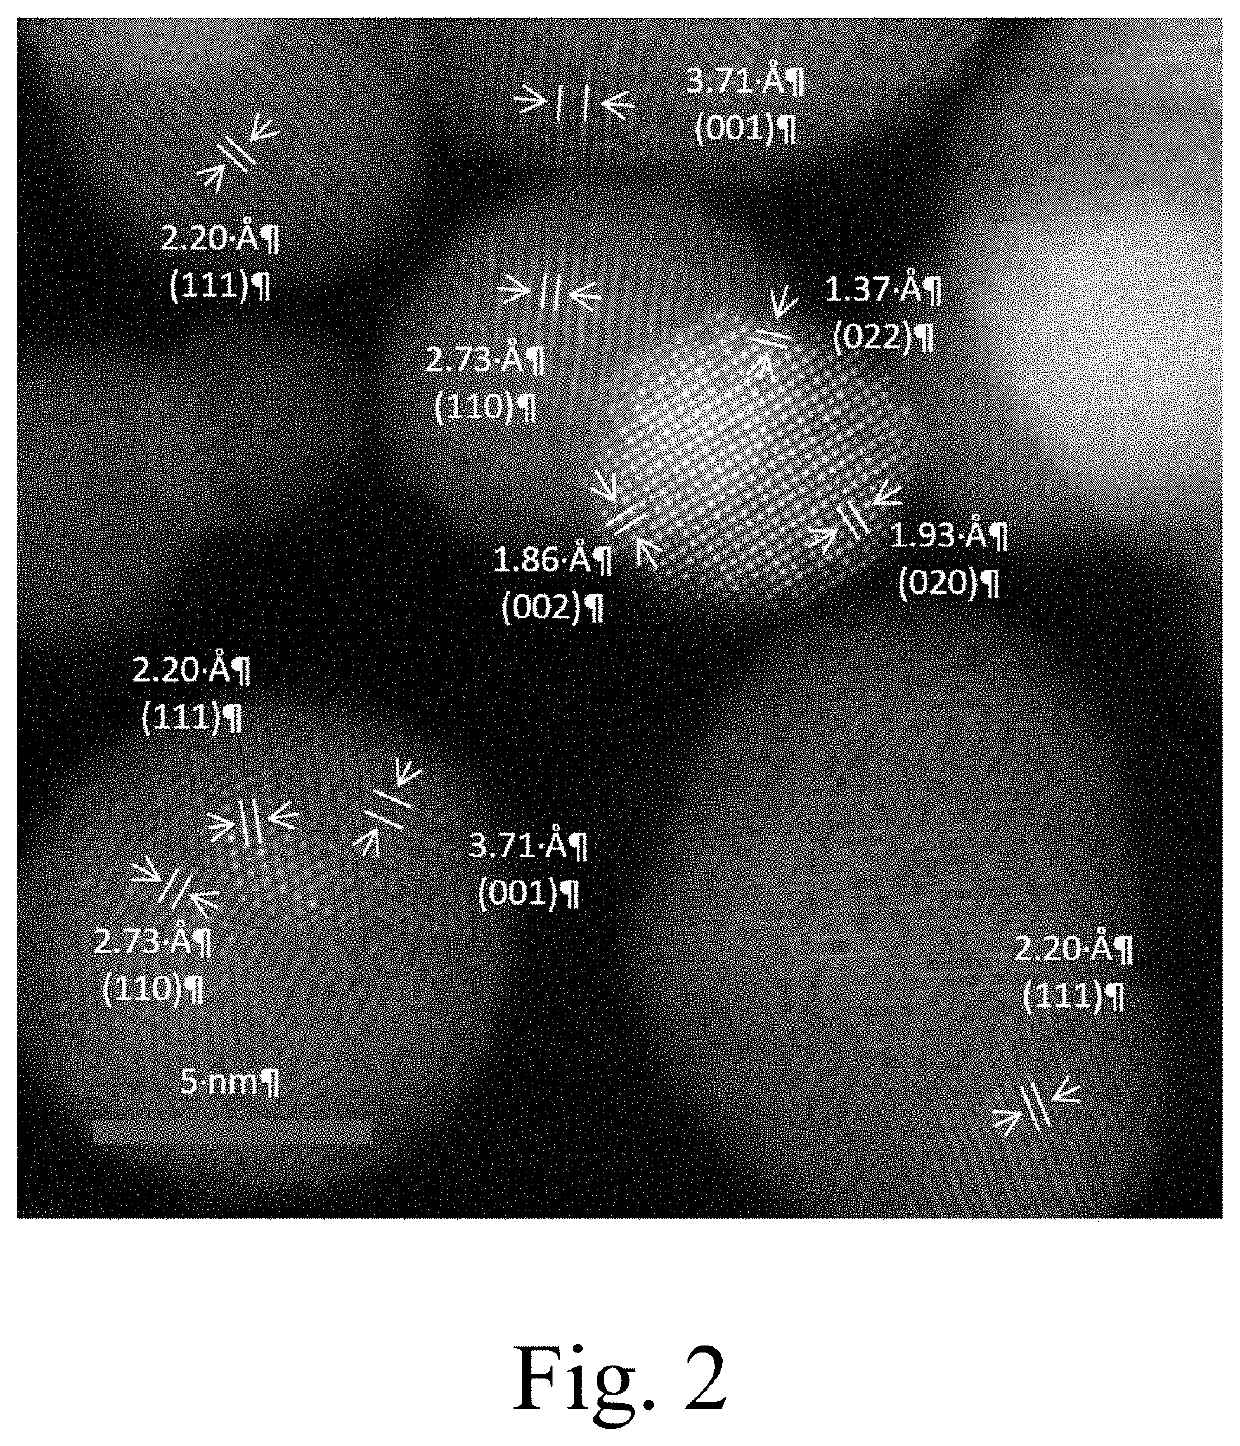 Fe<sub>43.4</sub>Pt<sub>52.3</sub>Cu<sub>4.3 </sub>polyhedron nanoparticle with heterogeneous phase structure, preparing method and application thereof